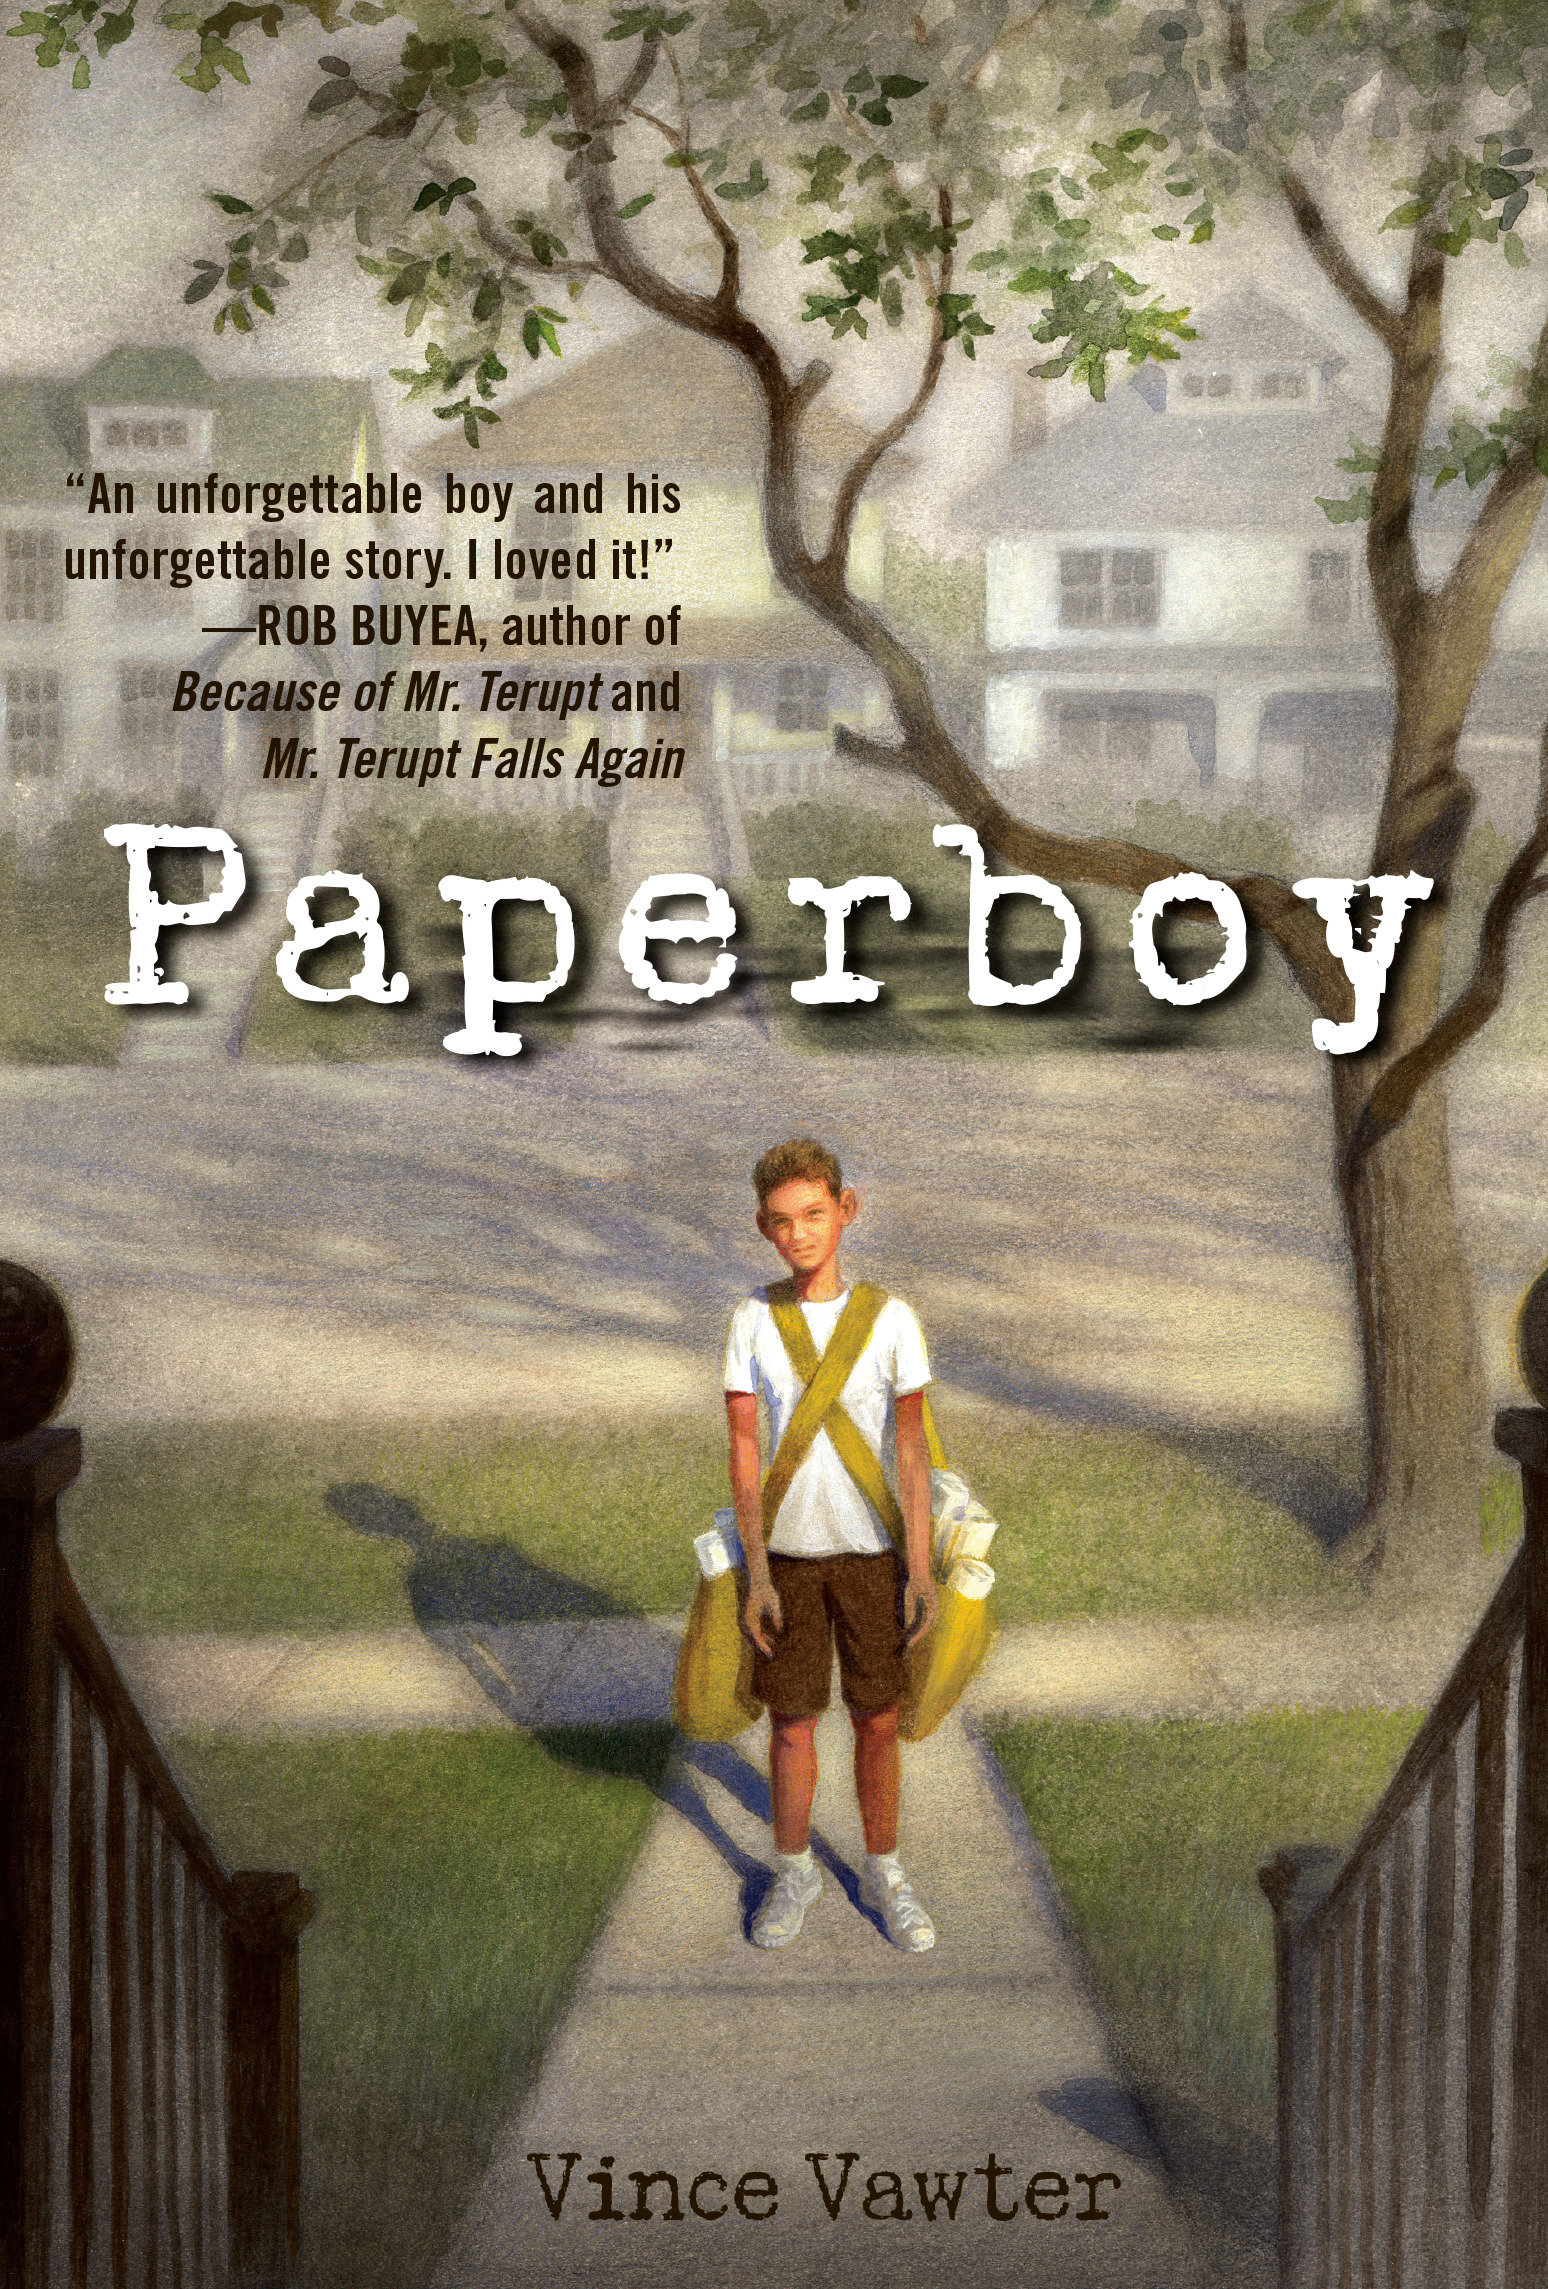 Paperboy cover image